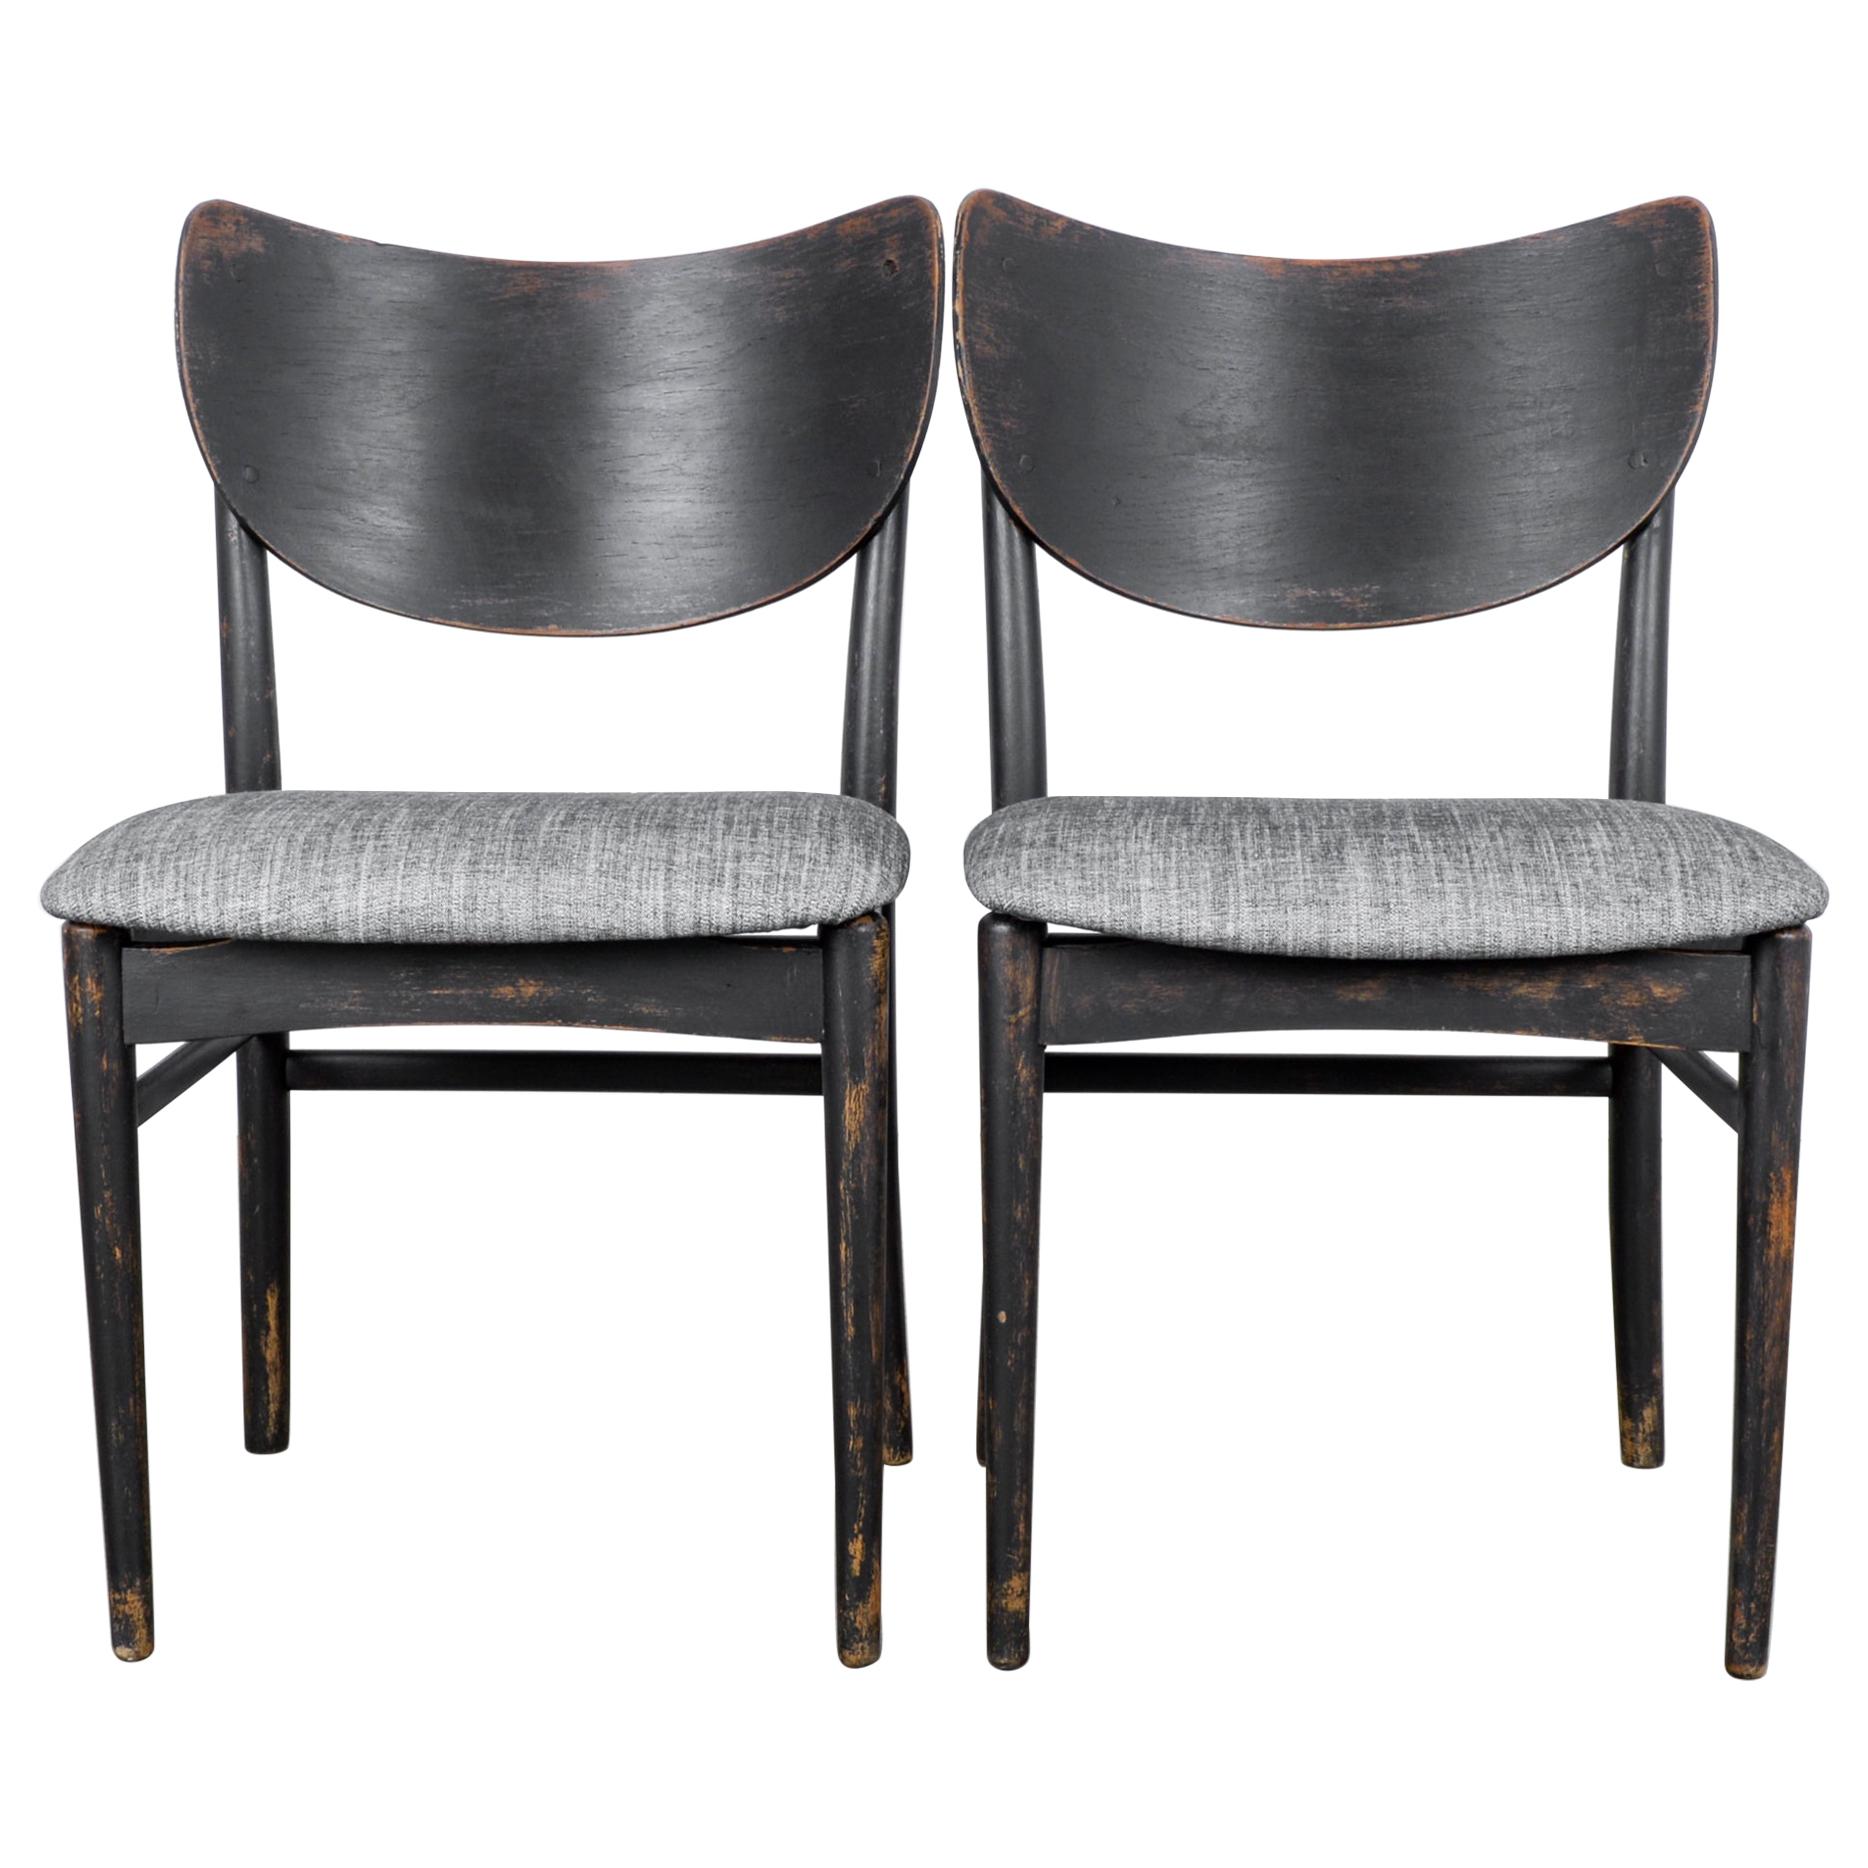 1950s Danish Wooden Side Chairs, a Pair